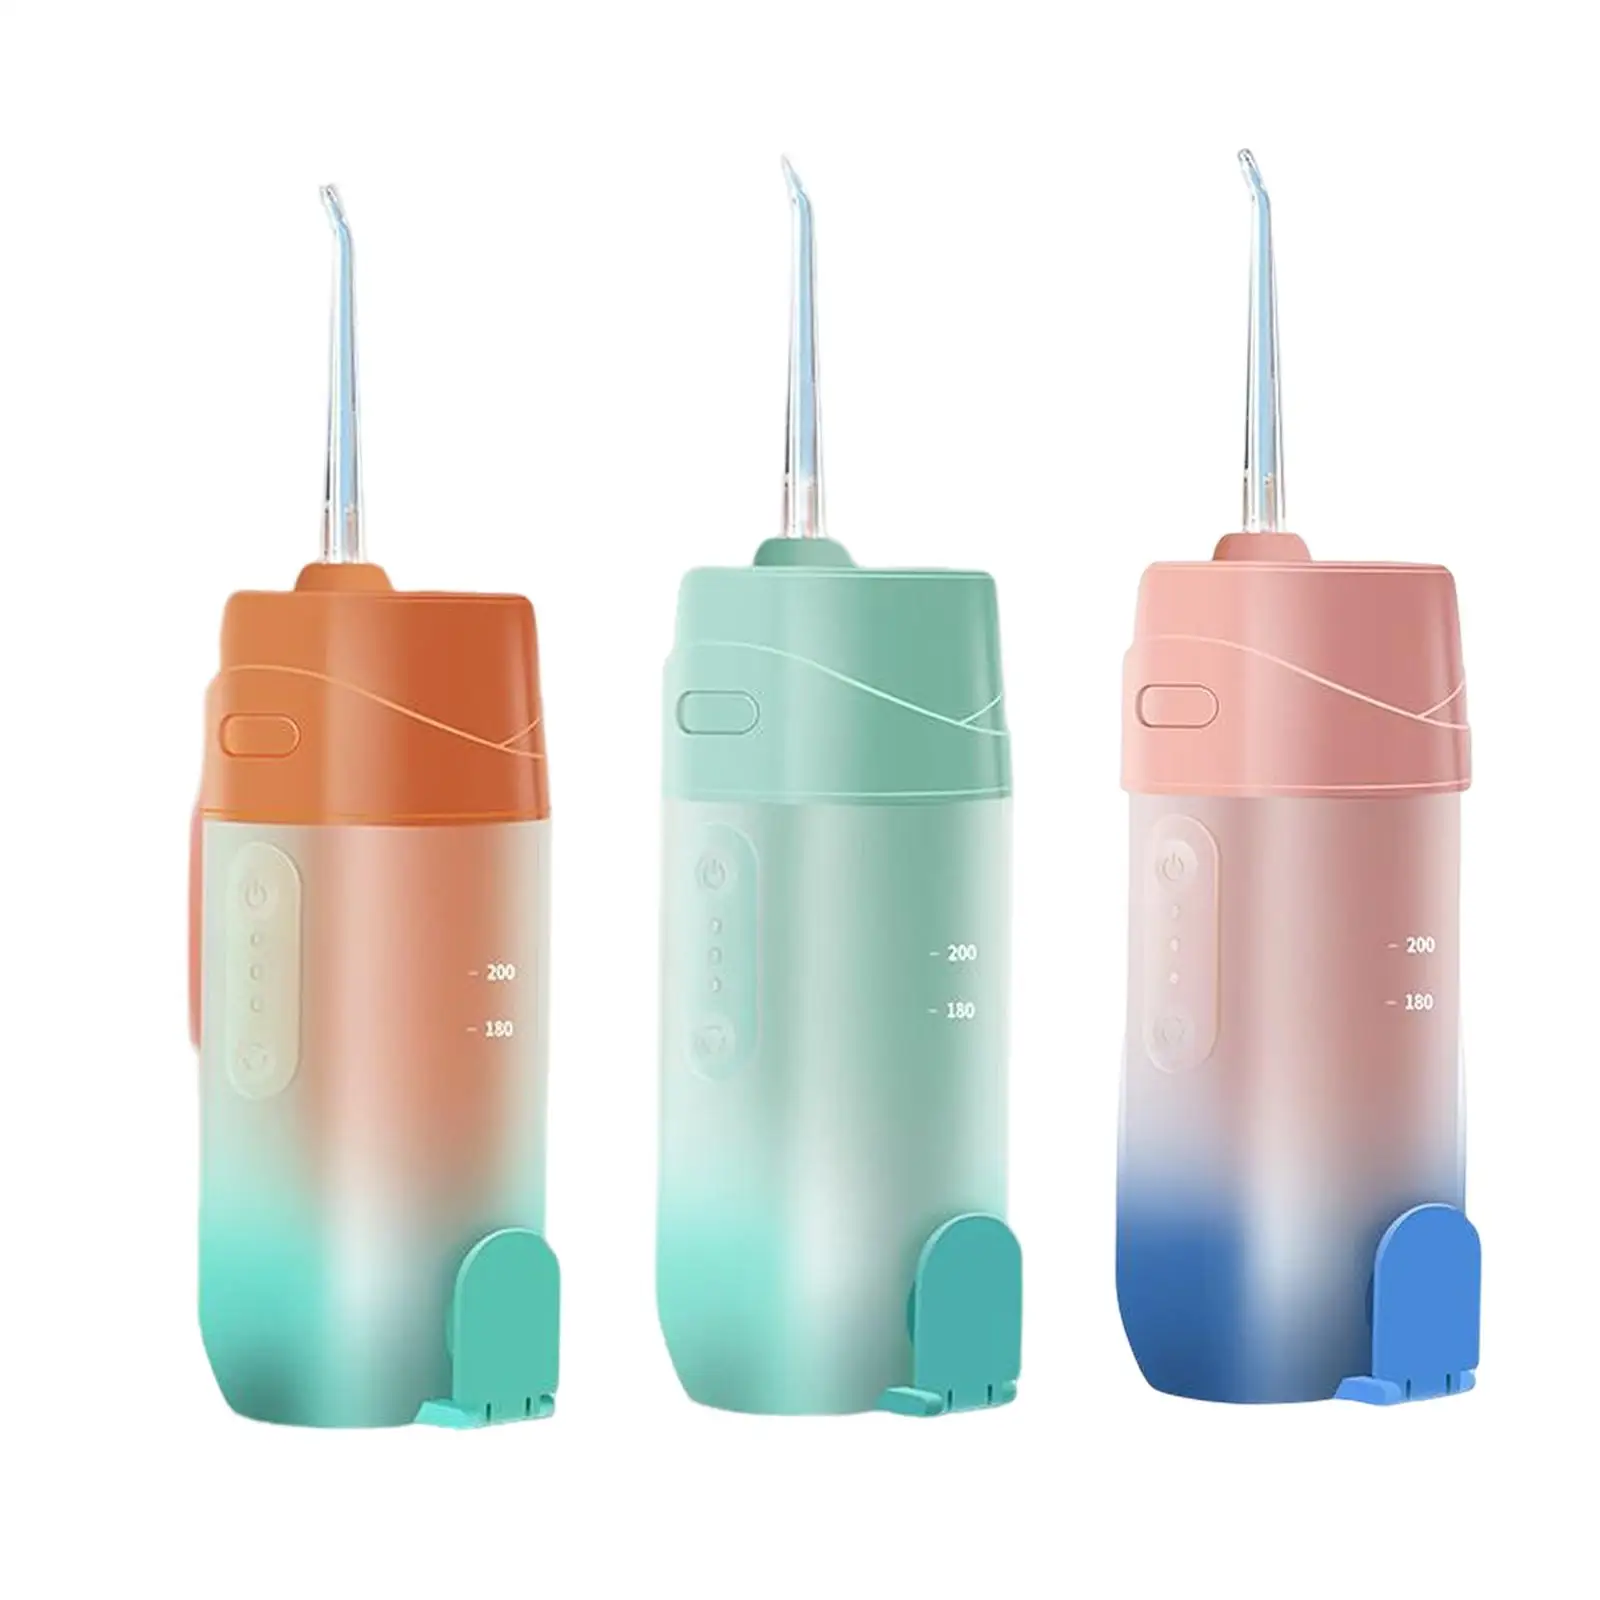 Compact Oral Irrigator Waterproof 200ml Oral Flossing Irrigator with 3 Modes Rechargeable IPX7 , Bathroom, Home,